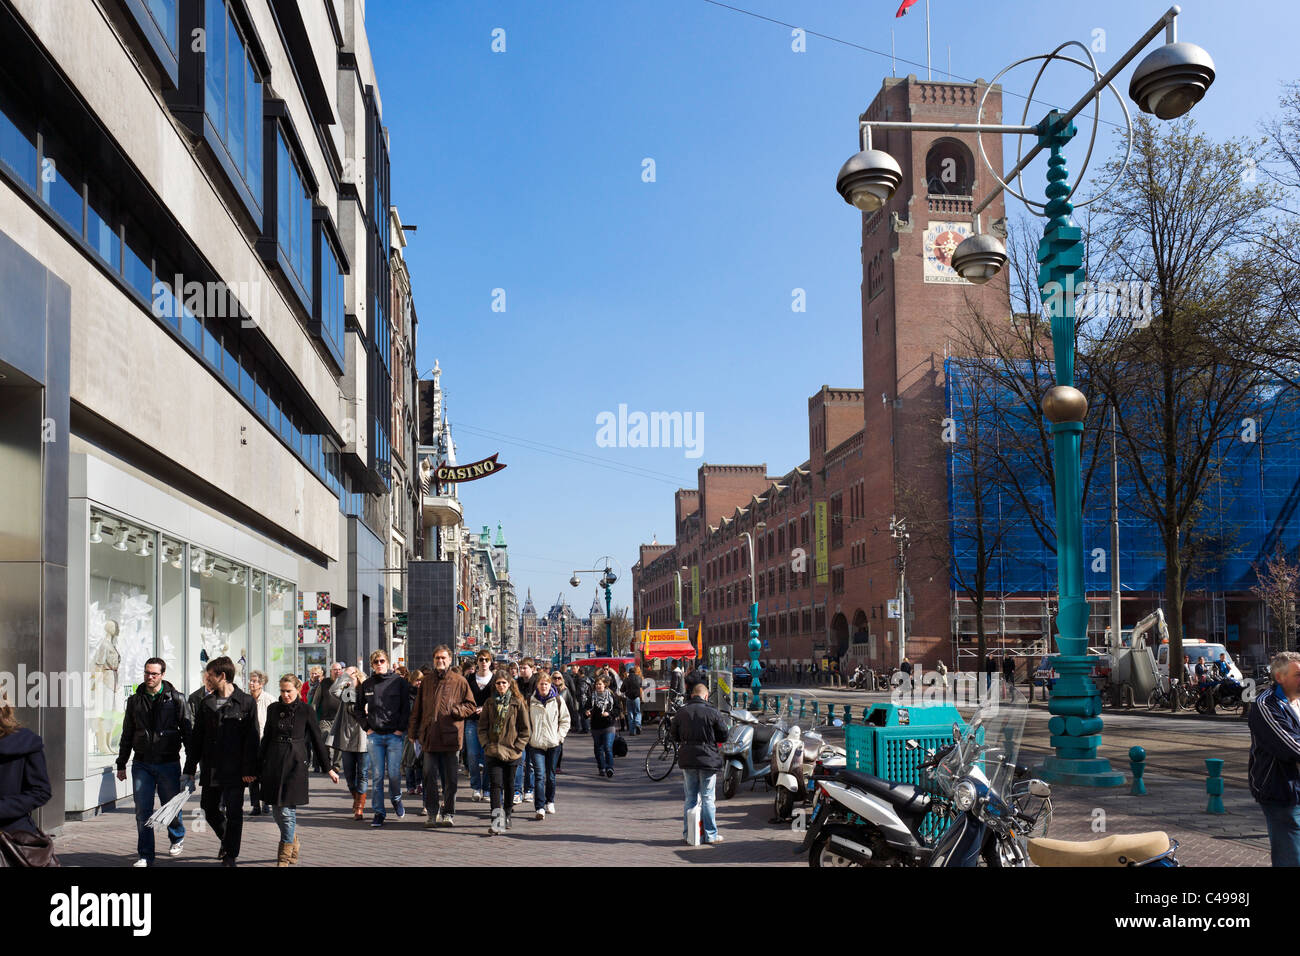 Shops on Damrak with Beurs van Berlage (the old Stock Exchange) on the right, Amsterdam, Netherlands Stock Photo